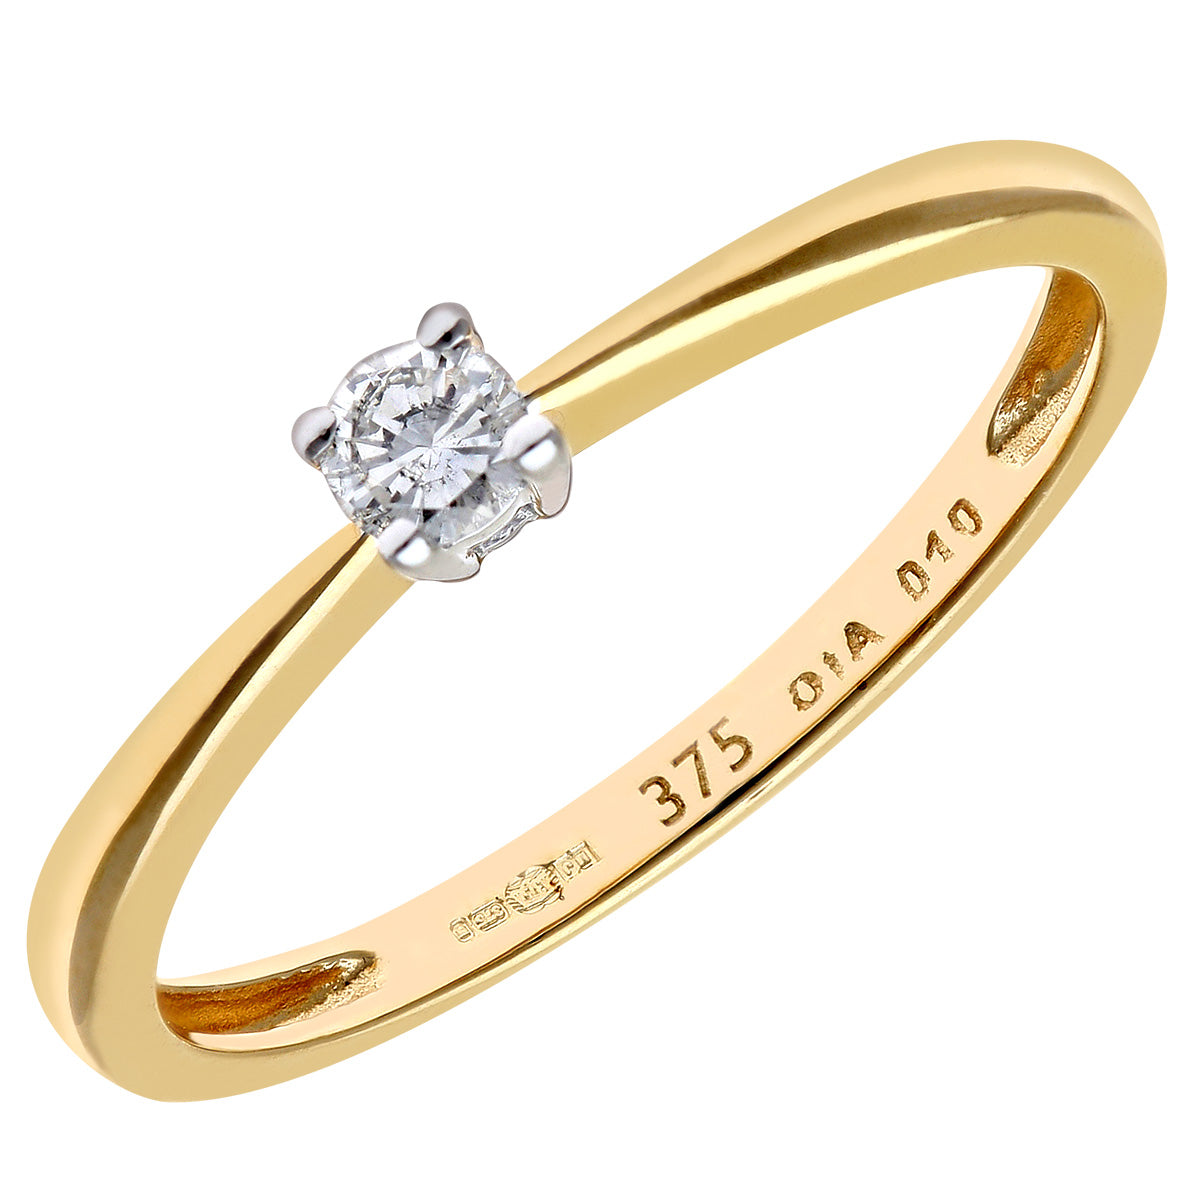 9ct Gold  Round 10pts Diamond 4 Claw Solitaire Engagement Ring - PR0AXL4304Y9JPK